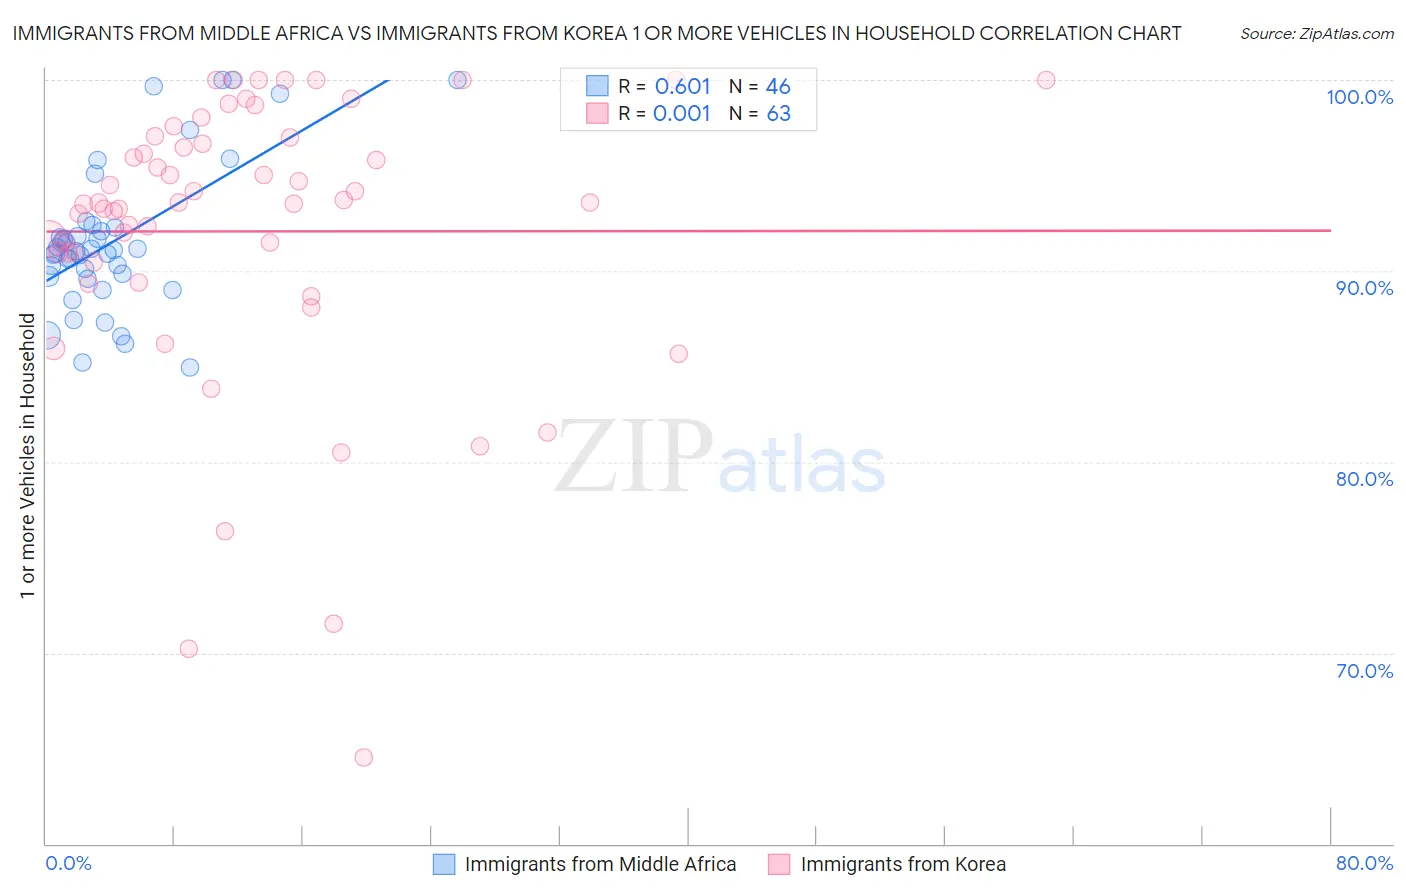 Immigrants from Middle Africa vs Immigrants from Korea 1 or more Vehicles in Household